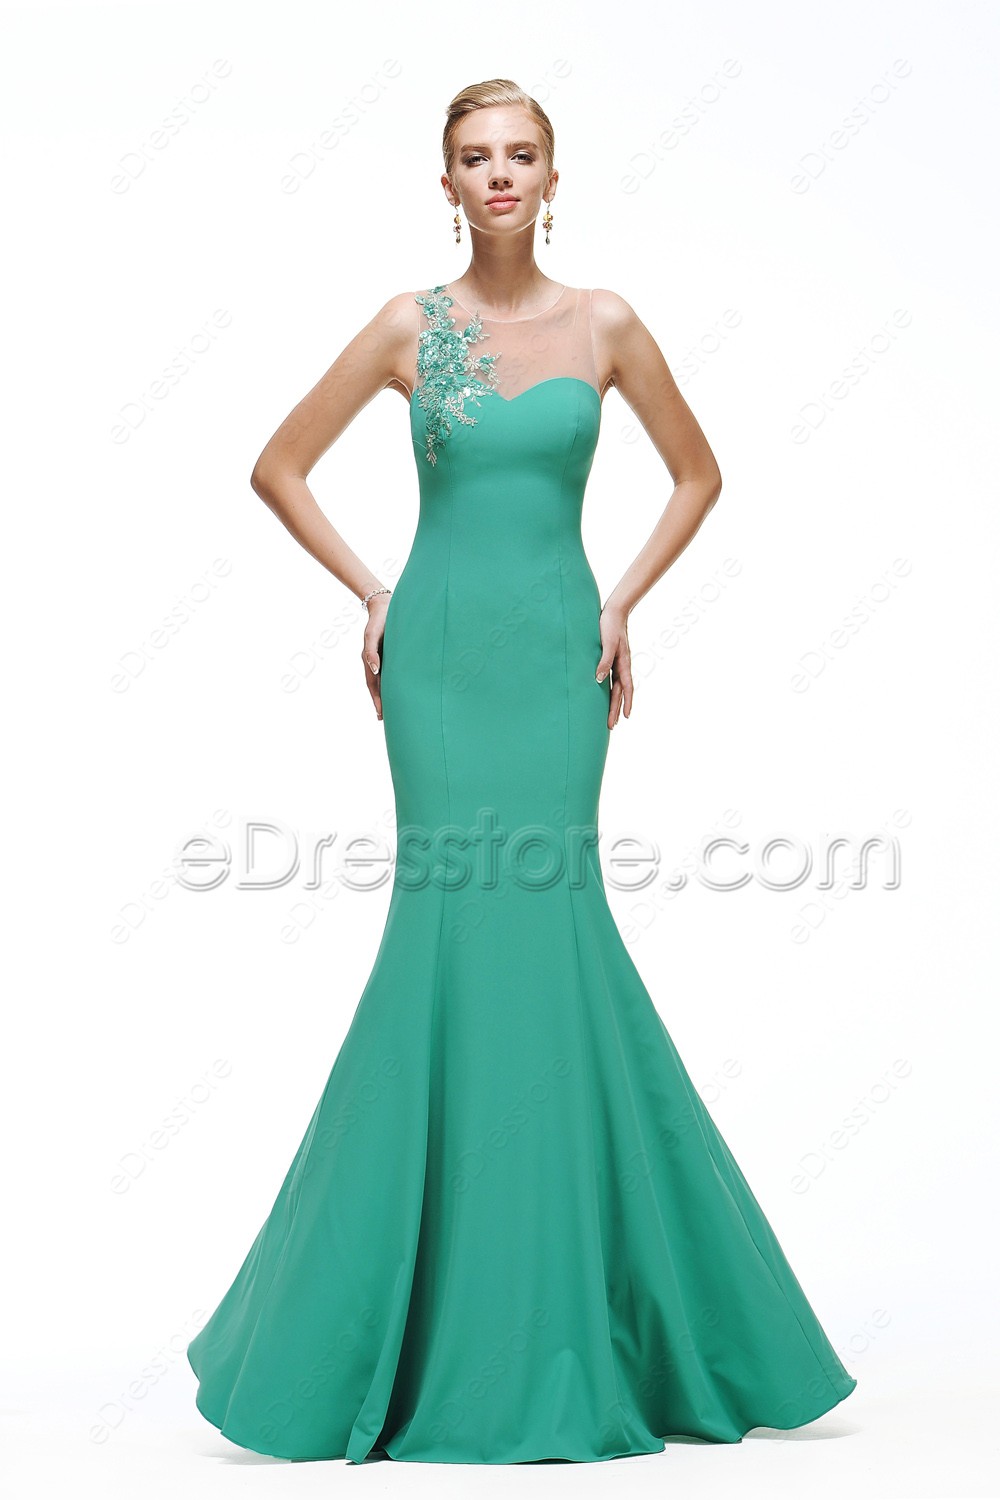 Green Mermaid Backless Prom Dress With Sequins 1592